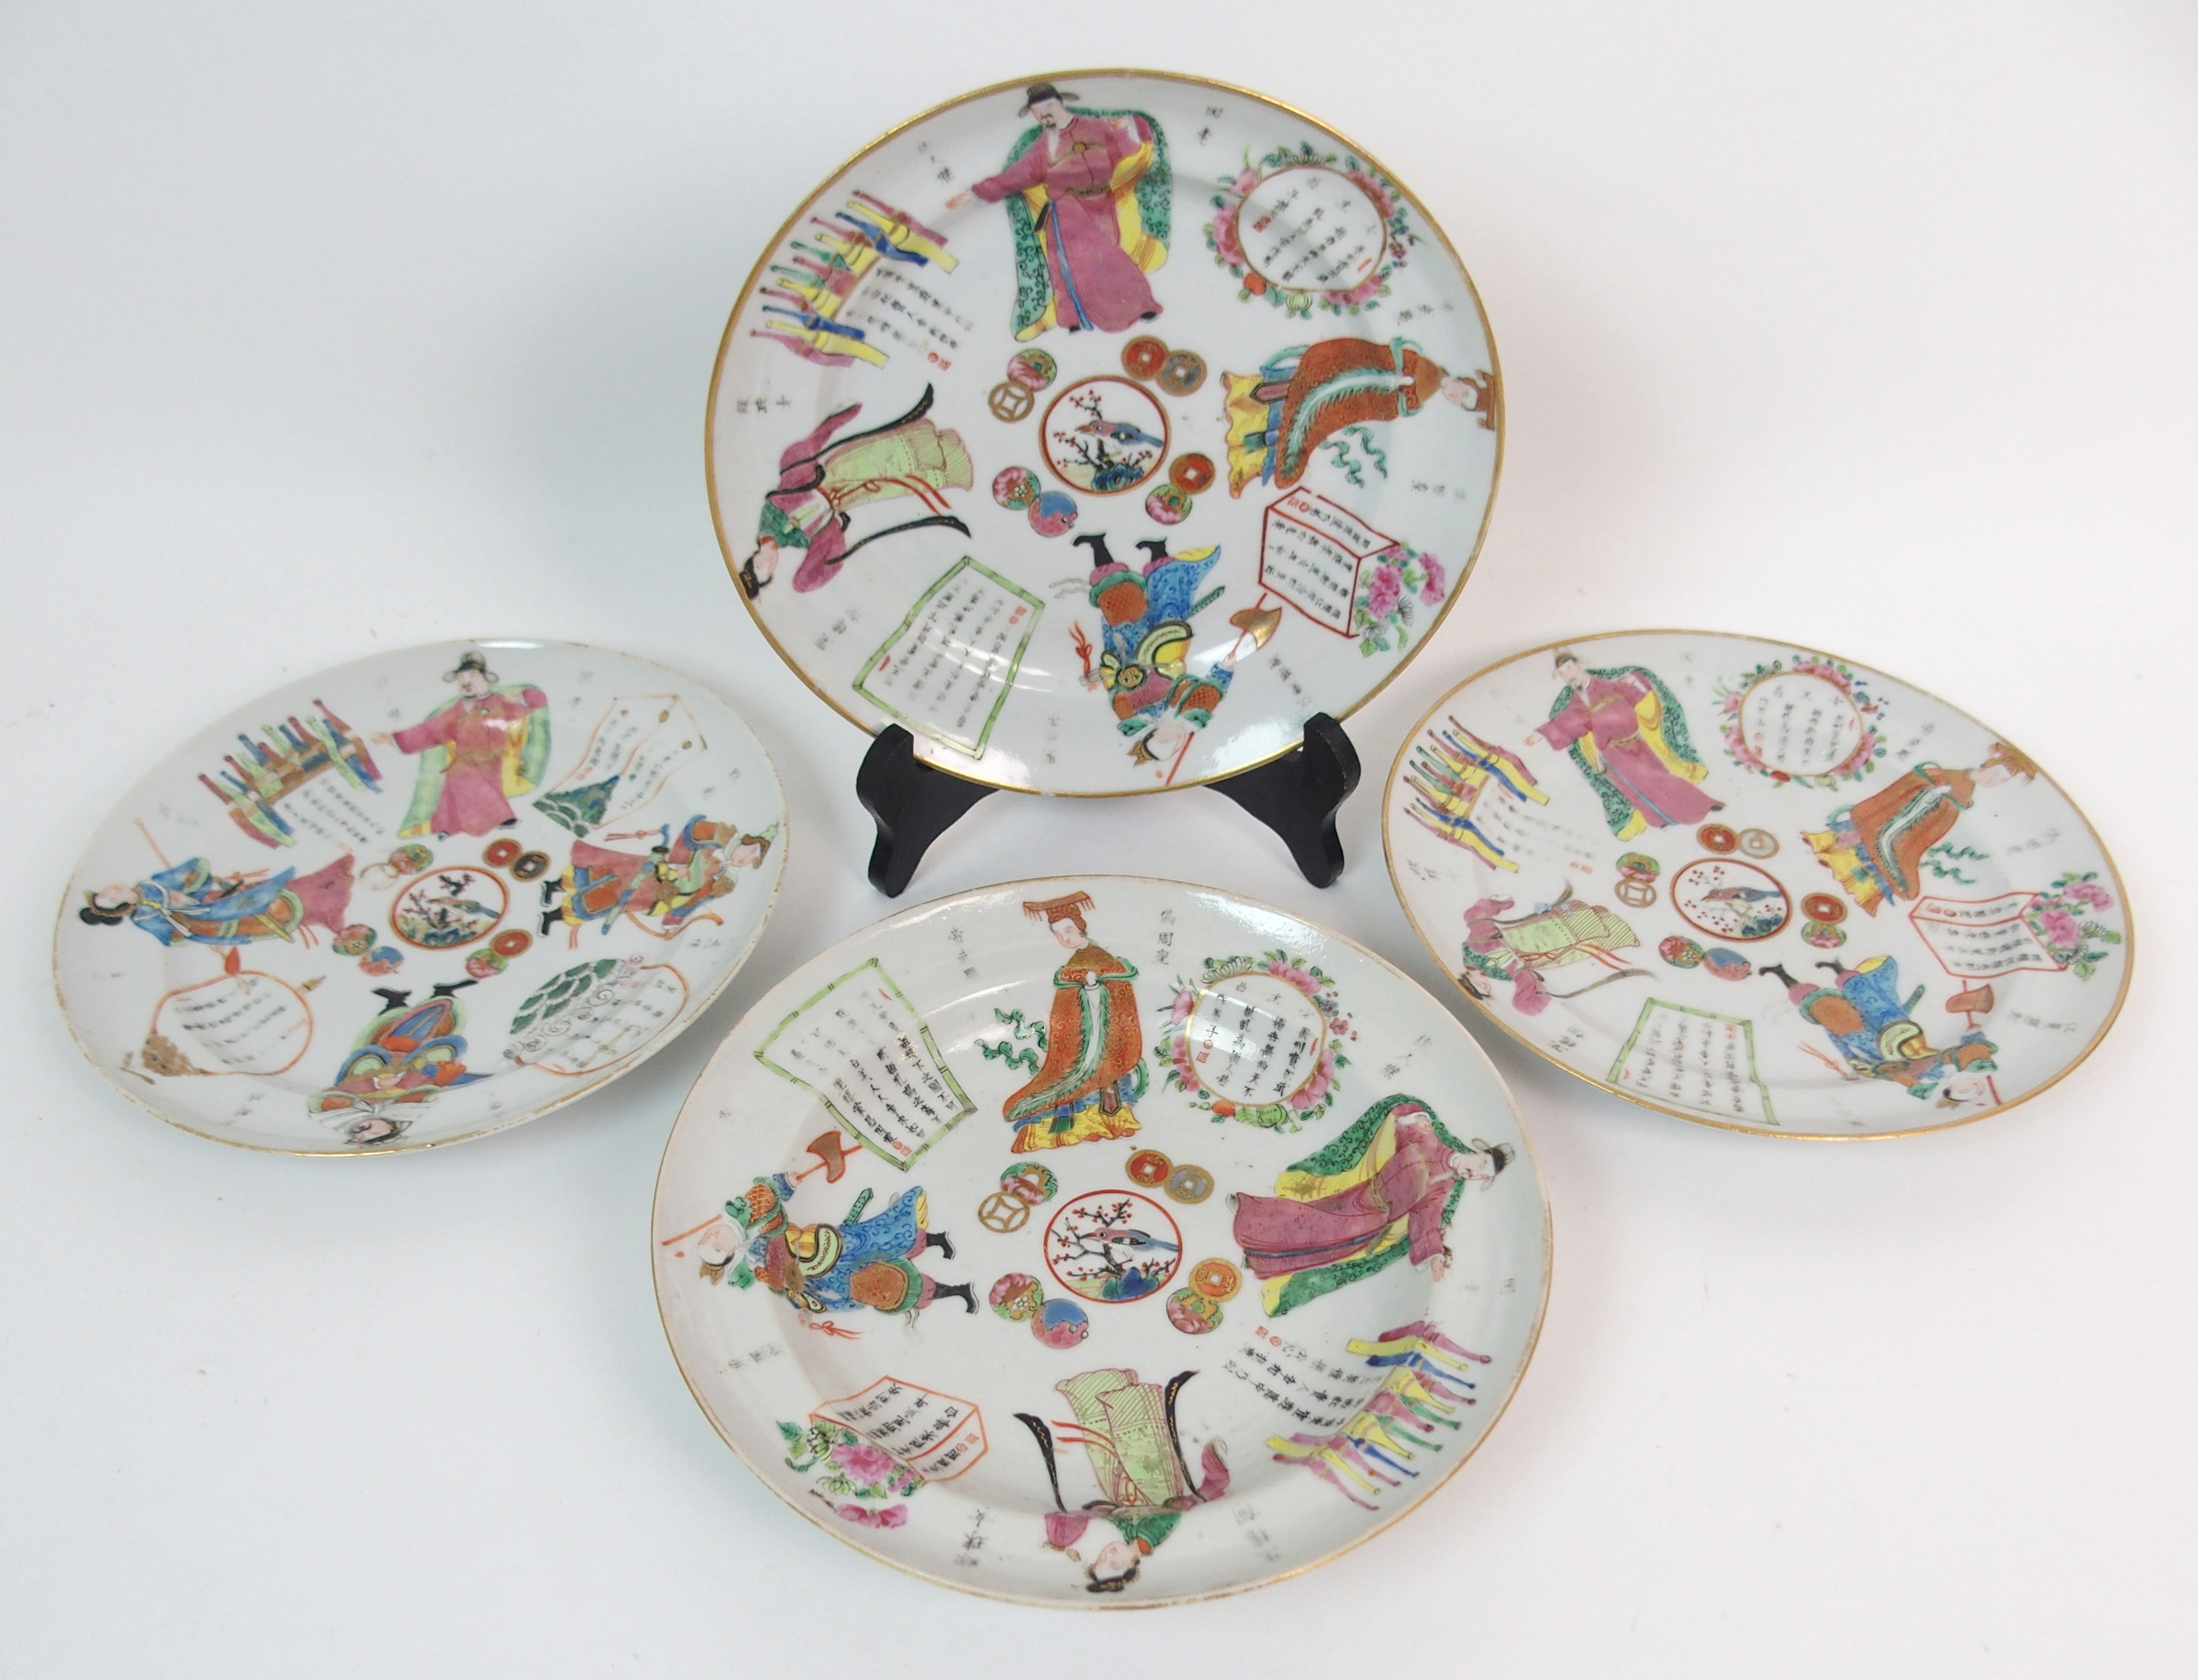 FOUR CANTON PLATES painted with figures, calligraphy, coins and birds within gilt rims (one with rim